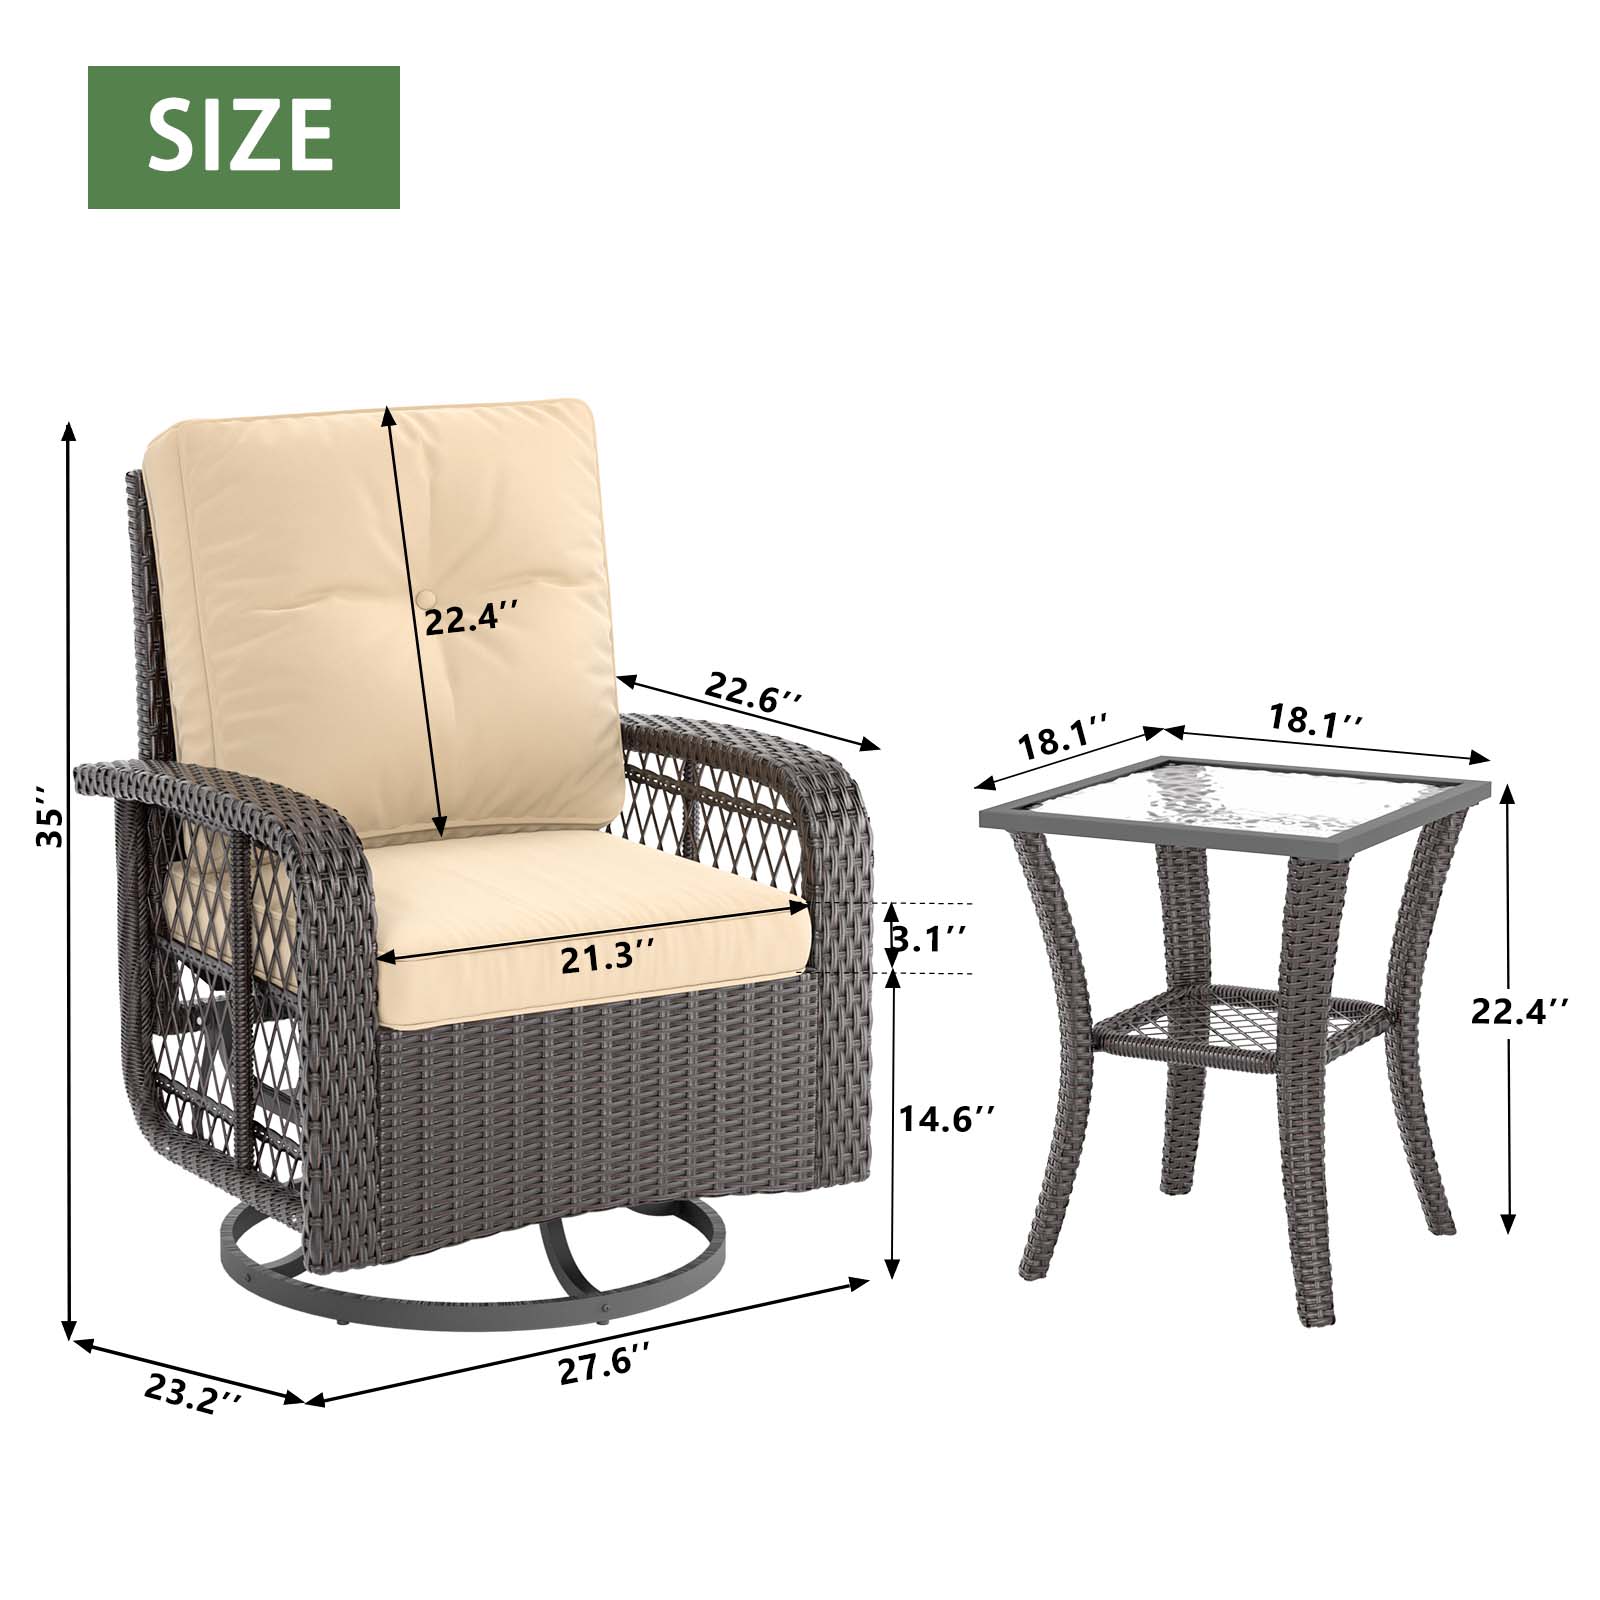 3 Pcs Outdoor Wicker Swivel Rocker Patio Set,360 Degree Swivel Rocking Chairs Elegant Wicker Patio Bistro Set with Premium Cushions and Armored Glass Top Side Table for Backyard -Brown